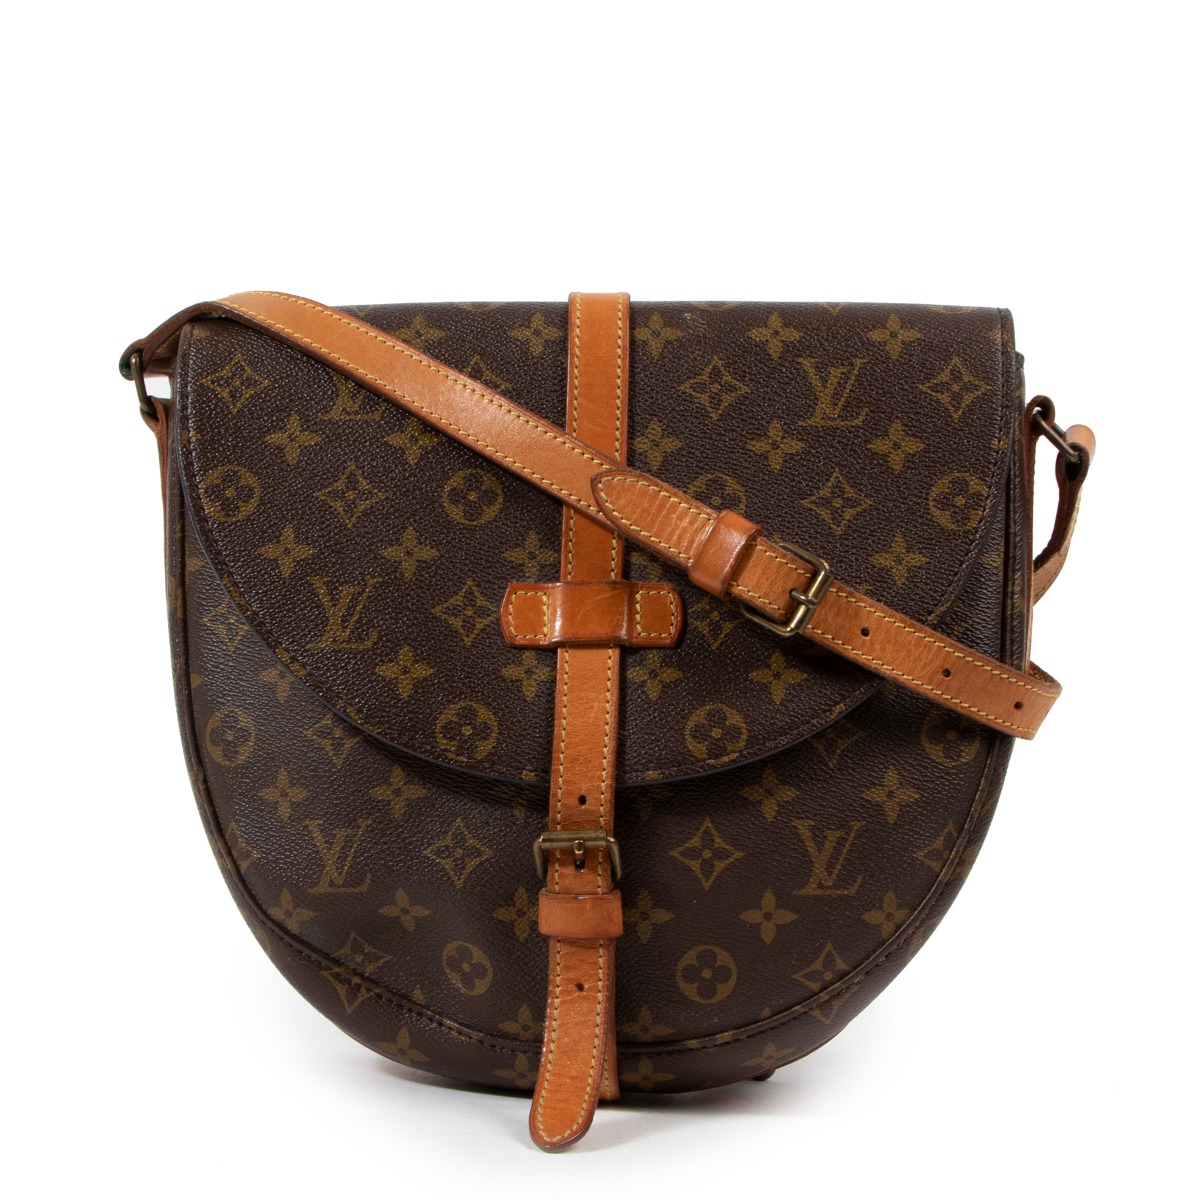 LOUIS VUITTON LV Chantilly GM Used Shoulder Bag Monogram M51232 #BY782 S